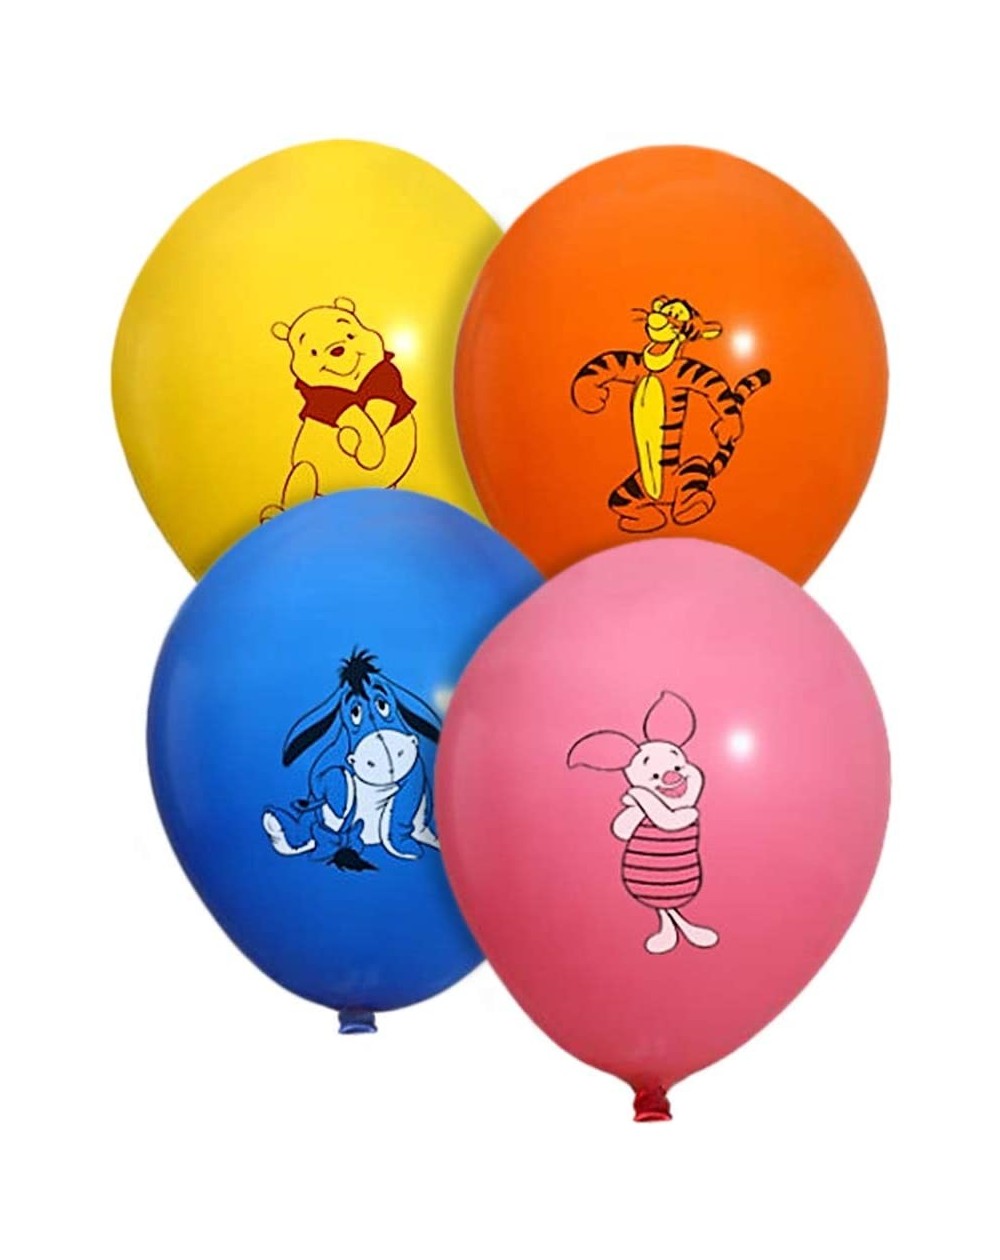 Balloons Winnie the Pooh and Friends 20 Count Party Balloon Pack - Large 12" Latex Balloons - CF18H78H62E $22.08